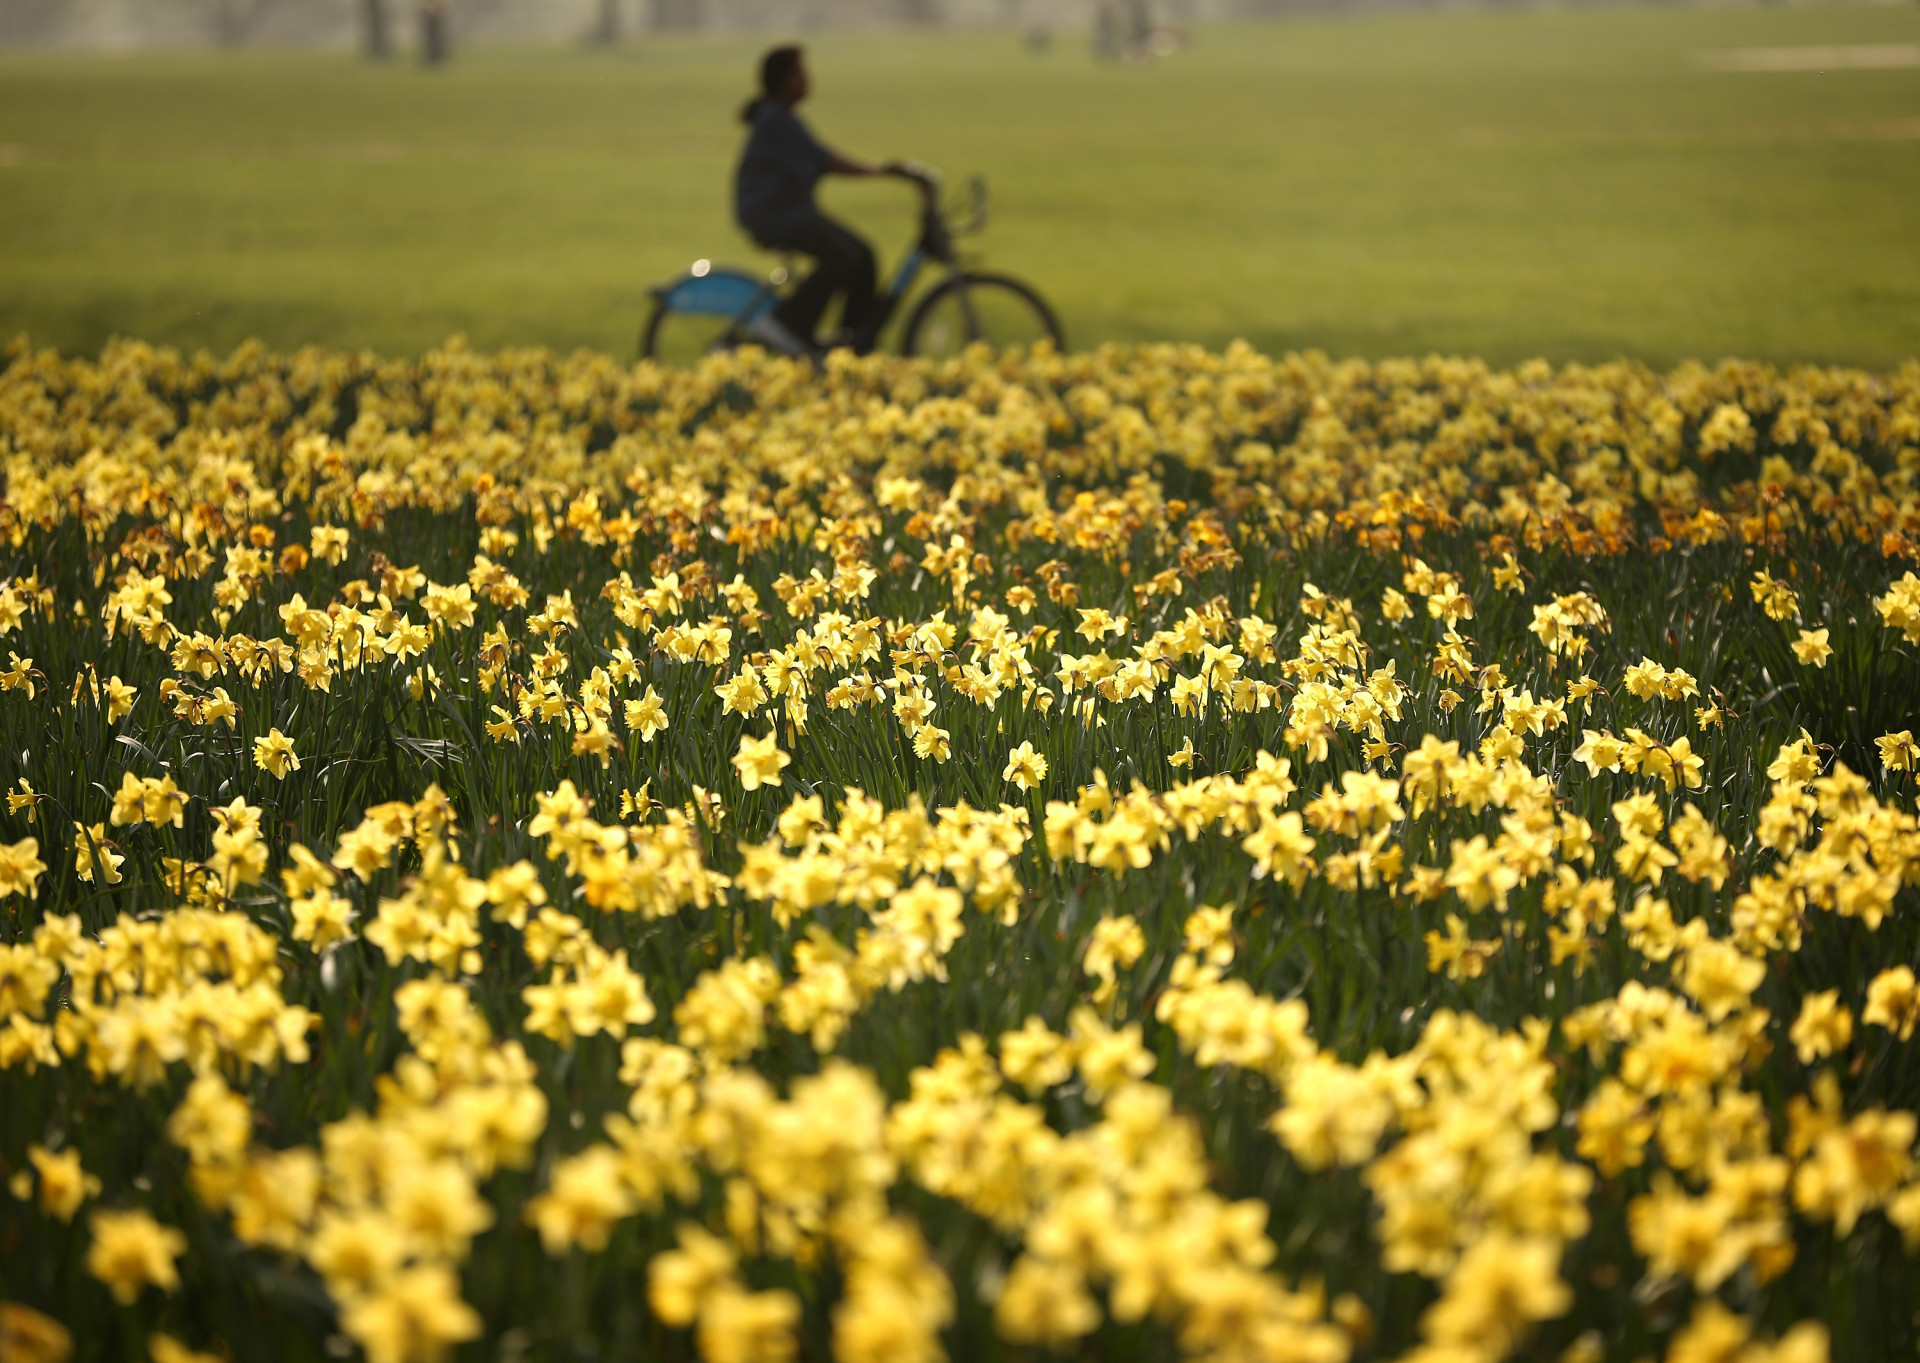 <p>There is nothing better than spotting the early signs of spring. In this gallery, take a look at the UK's top parks, gardens, and woodlands to see the blossom this spring.</p><p>You may also like:<a href="https://www.starsinsider.com/n/182220?utm_source=msn.com&utm_medium=display&utm_campaign=referral_description&utm_content=344596v2en-us"> The Empire State Building: beautiful pics and interesting facts</a></p>